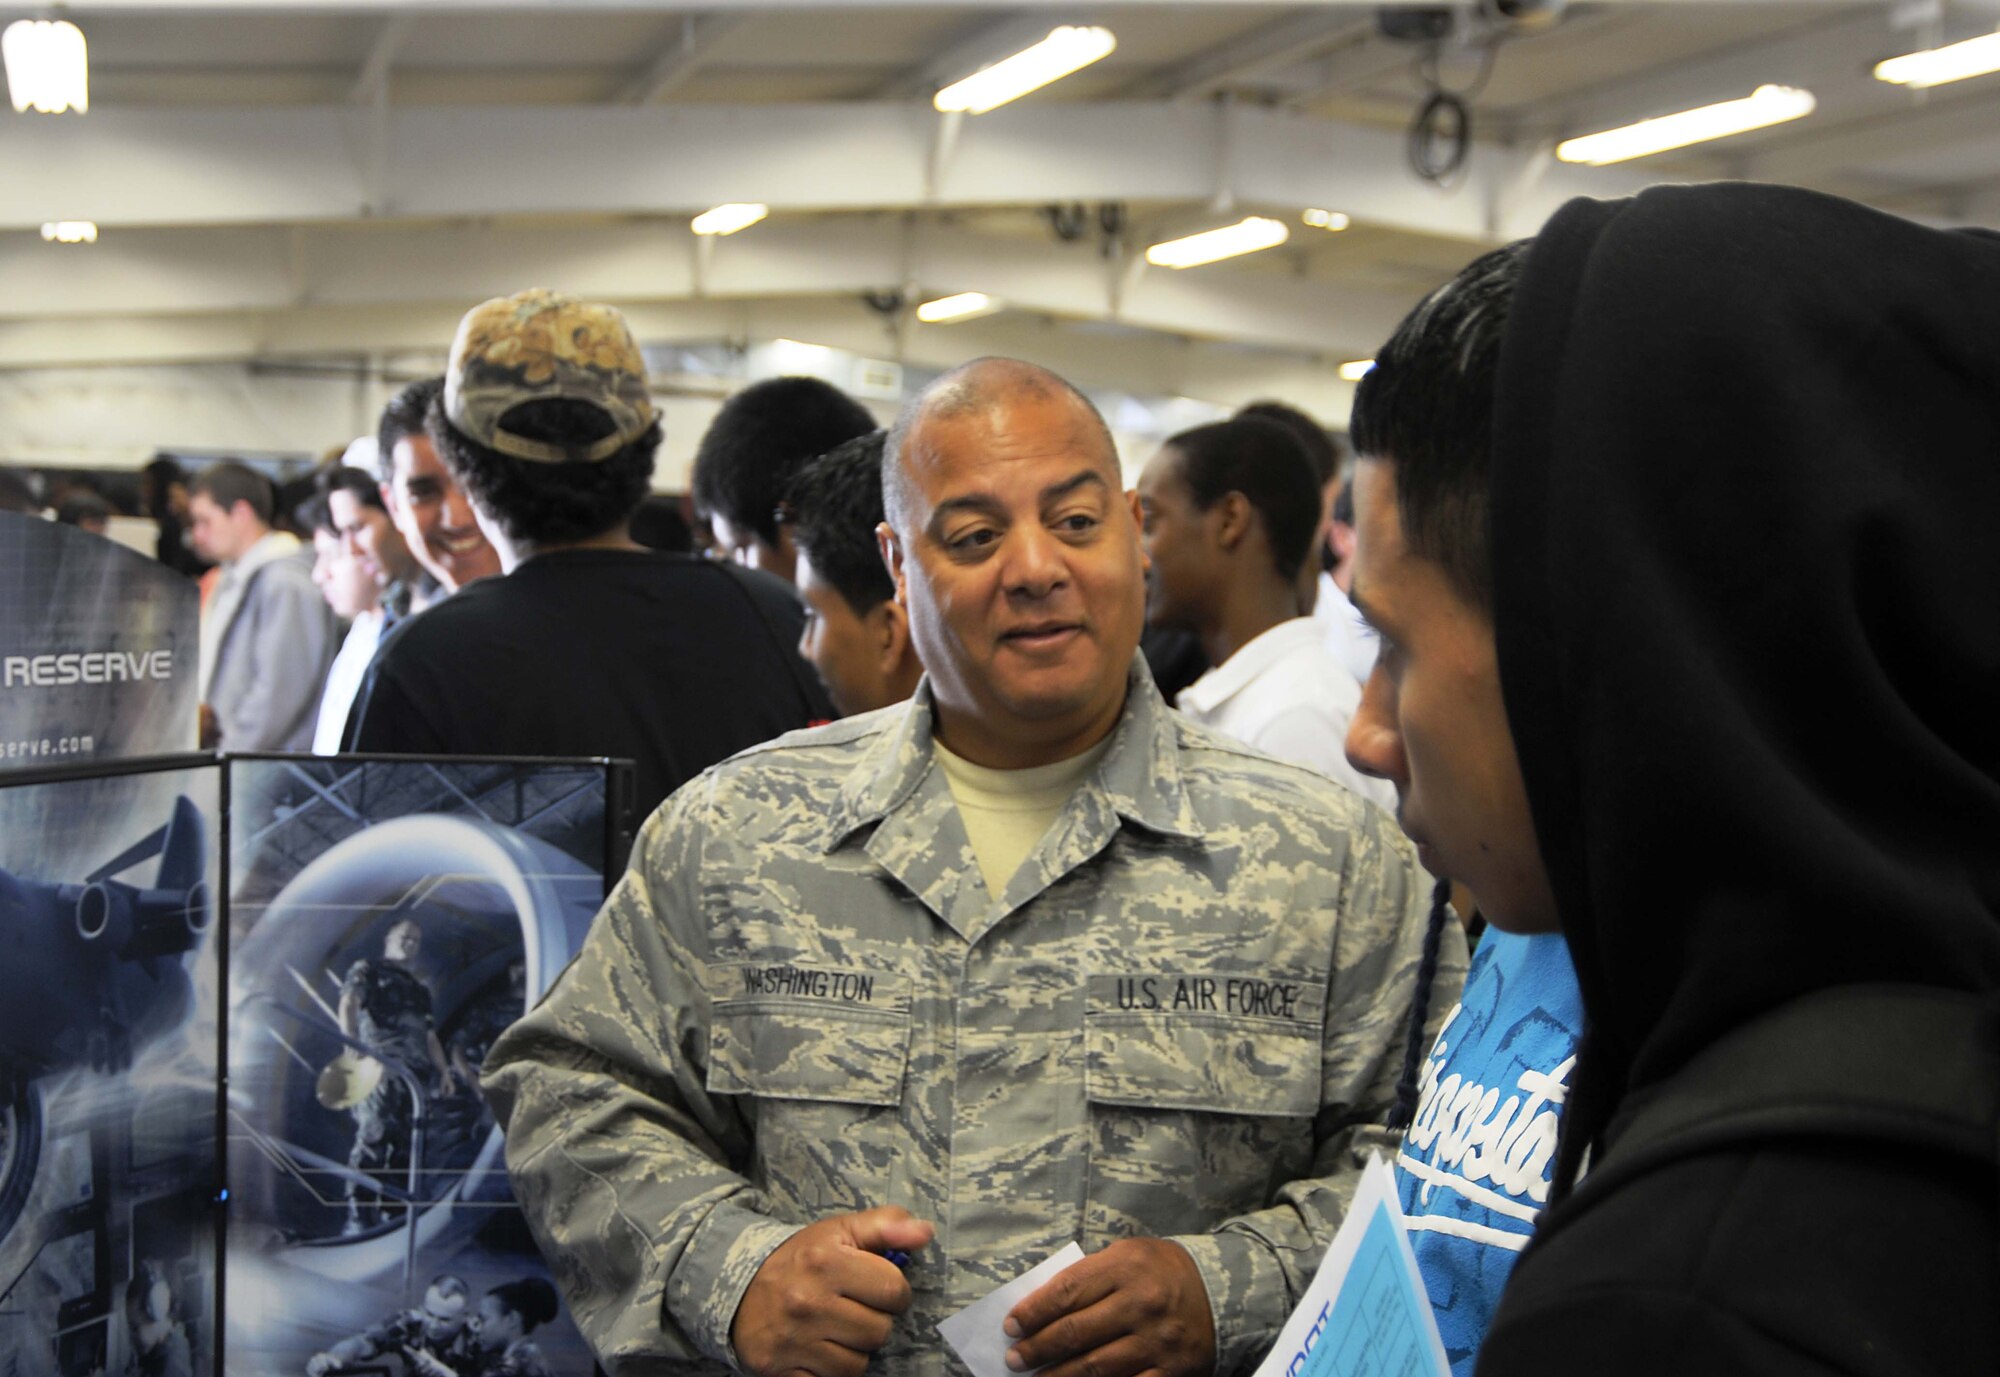 At the Virginia Department of Transportation Career Fair Oct. 8 in Manassas, Virginia, Master Sgt. Lionel Washington, an aircraft mechanic with the 459th Air Refueling Wing discussed the benefits of enlisting in the Air Force Reserve, his experiences with the KC-135R and the various career opportunities open to high school graduates.  The event hosted more than 700 high school students from Prince William County. (U.S. Air Force Photo/Captain Rebecca Garcia)
